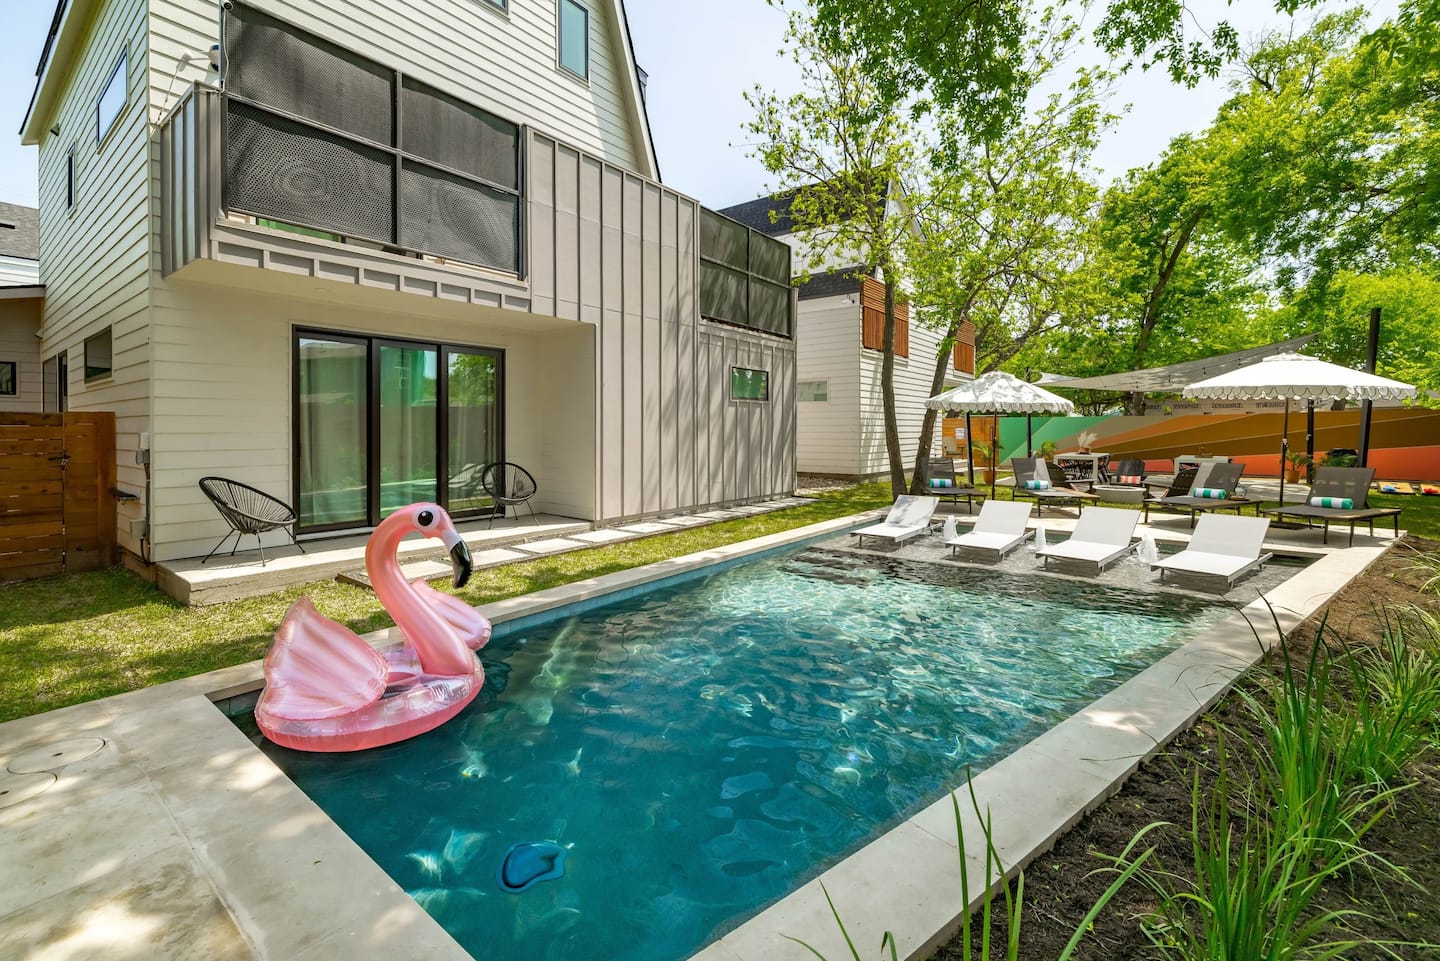 Modern and lavish palm manor, one of the best Airbnbs in Texas